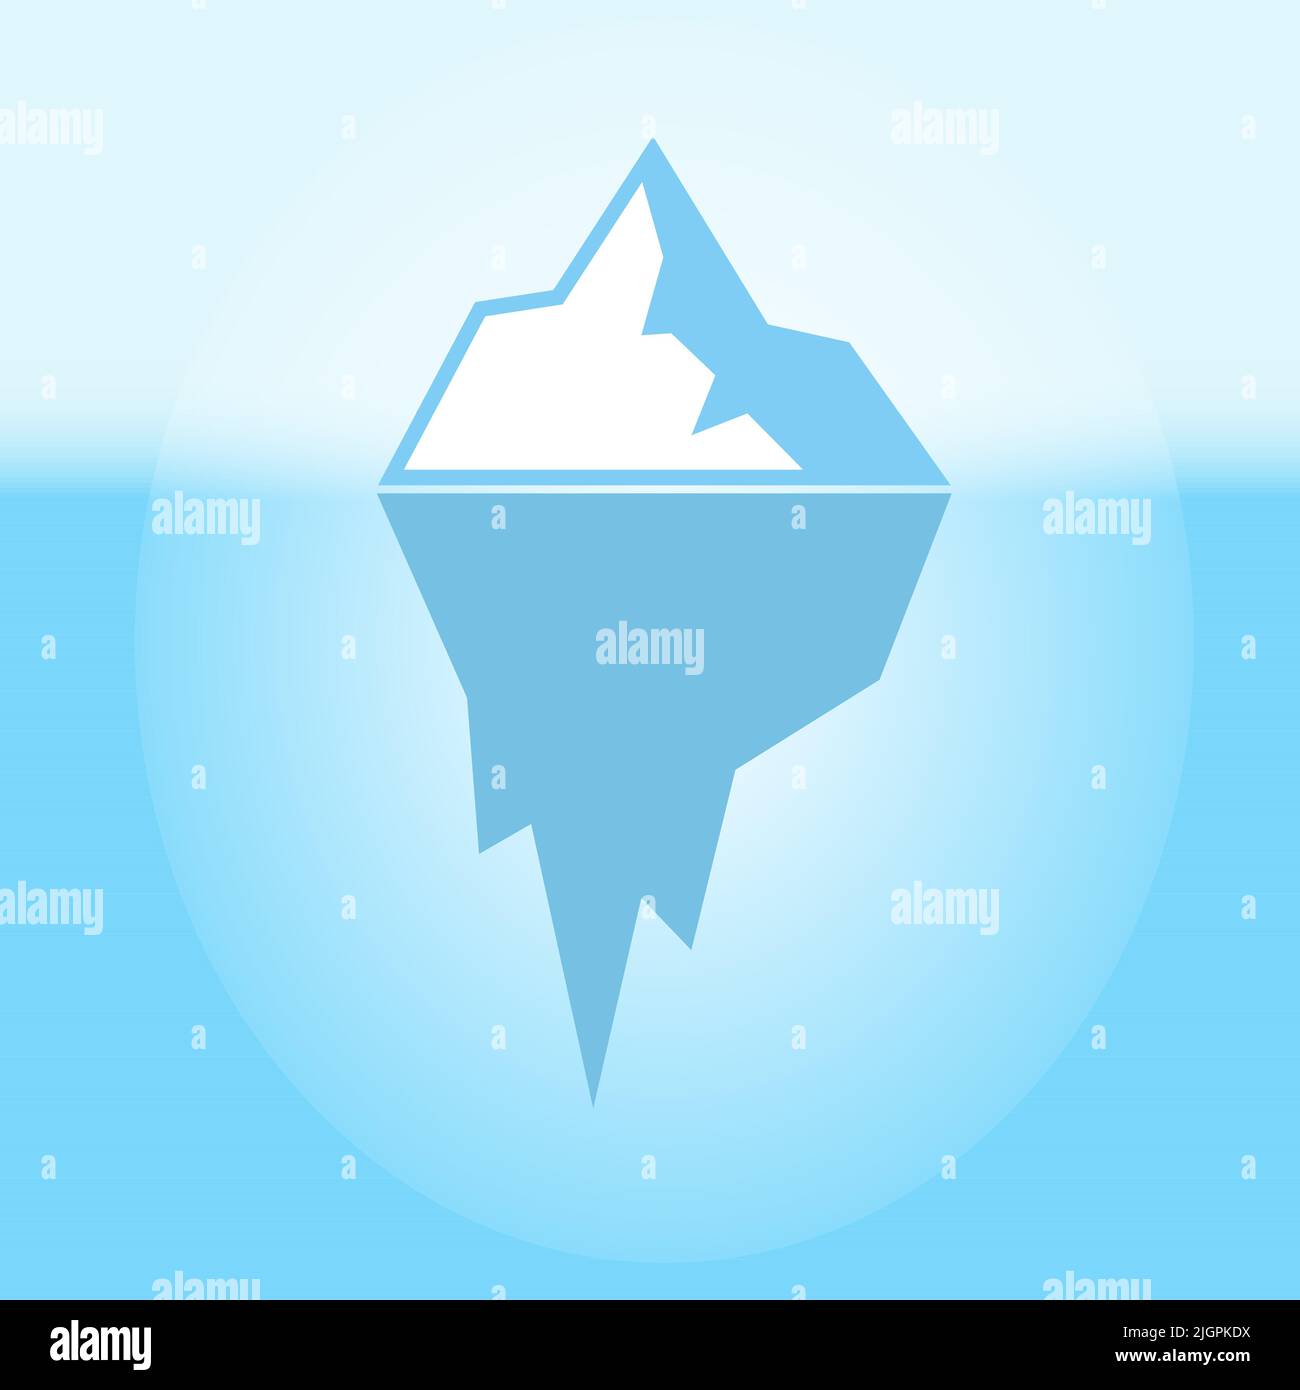 ceberg. Vector icon of a glacier drifting across the ocean. Illustration for website, application and creative design. Flat style Stock Vector